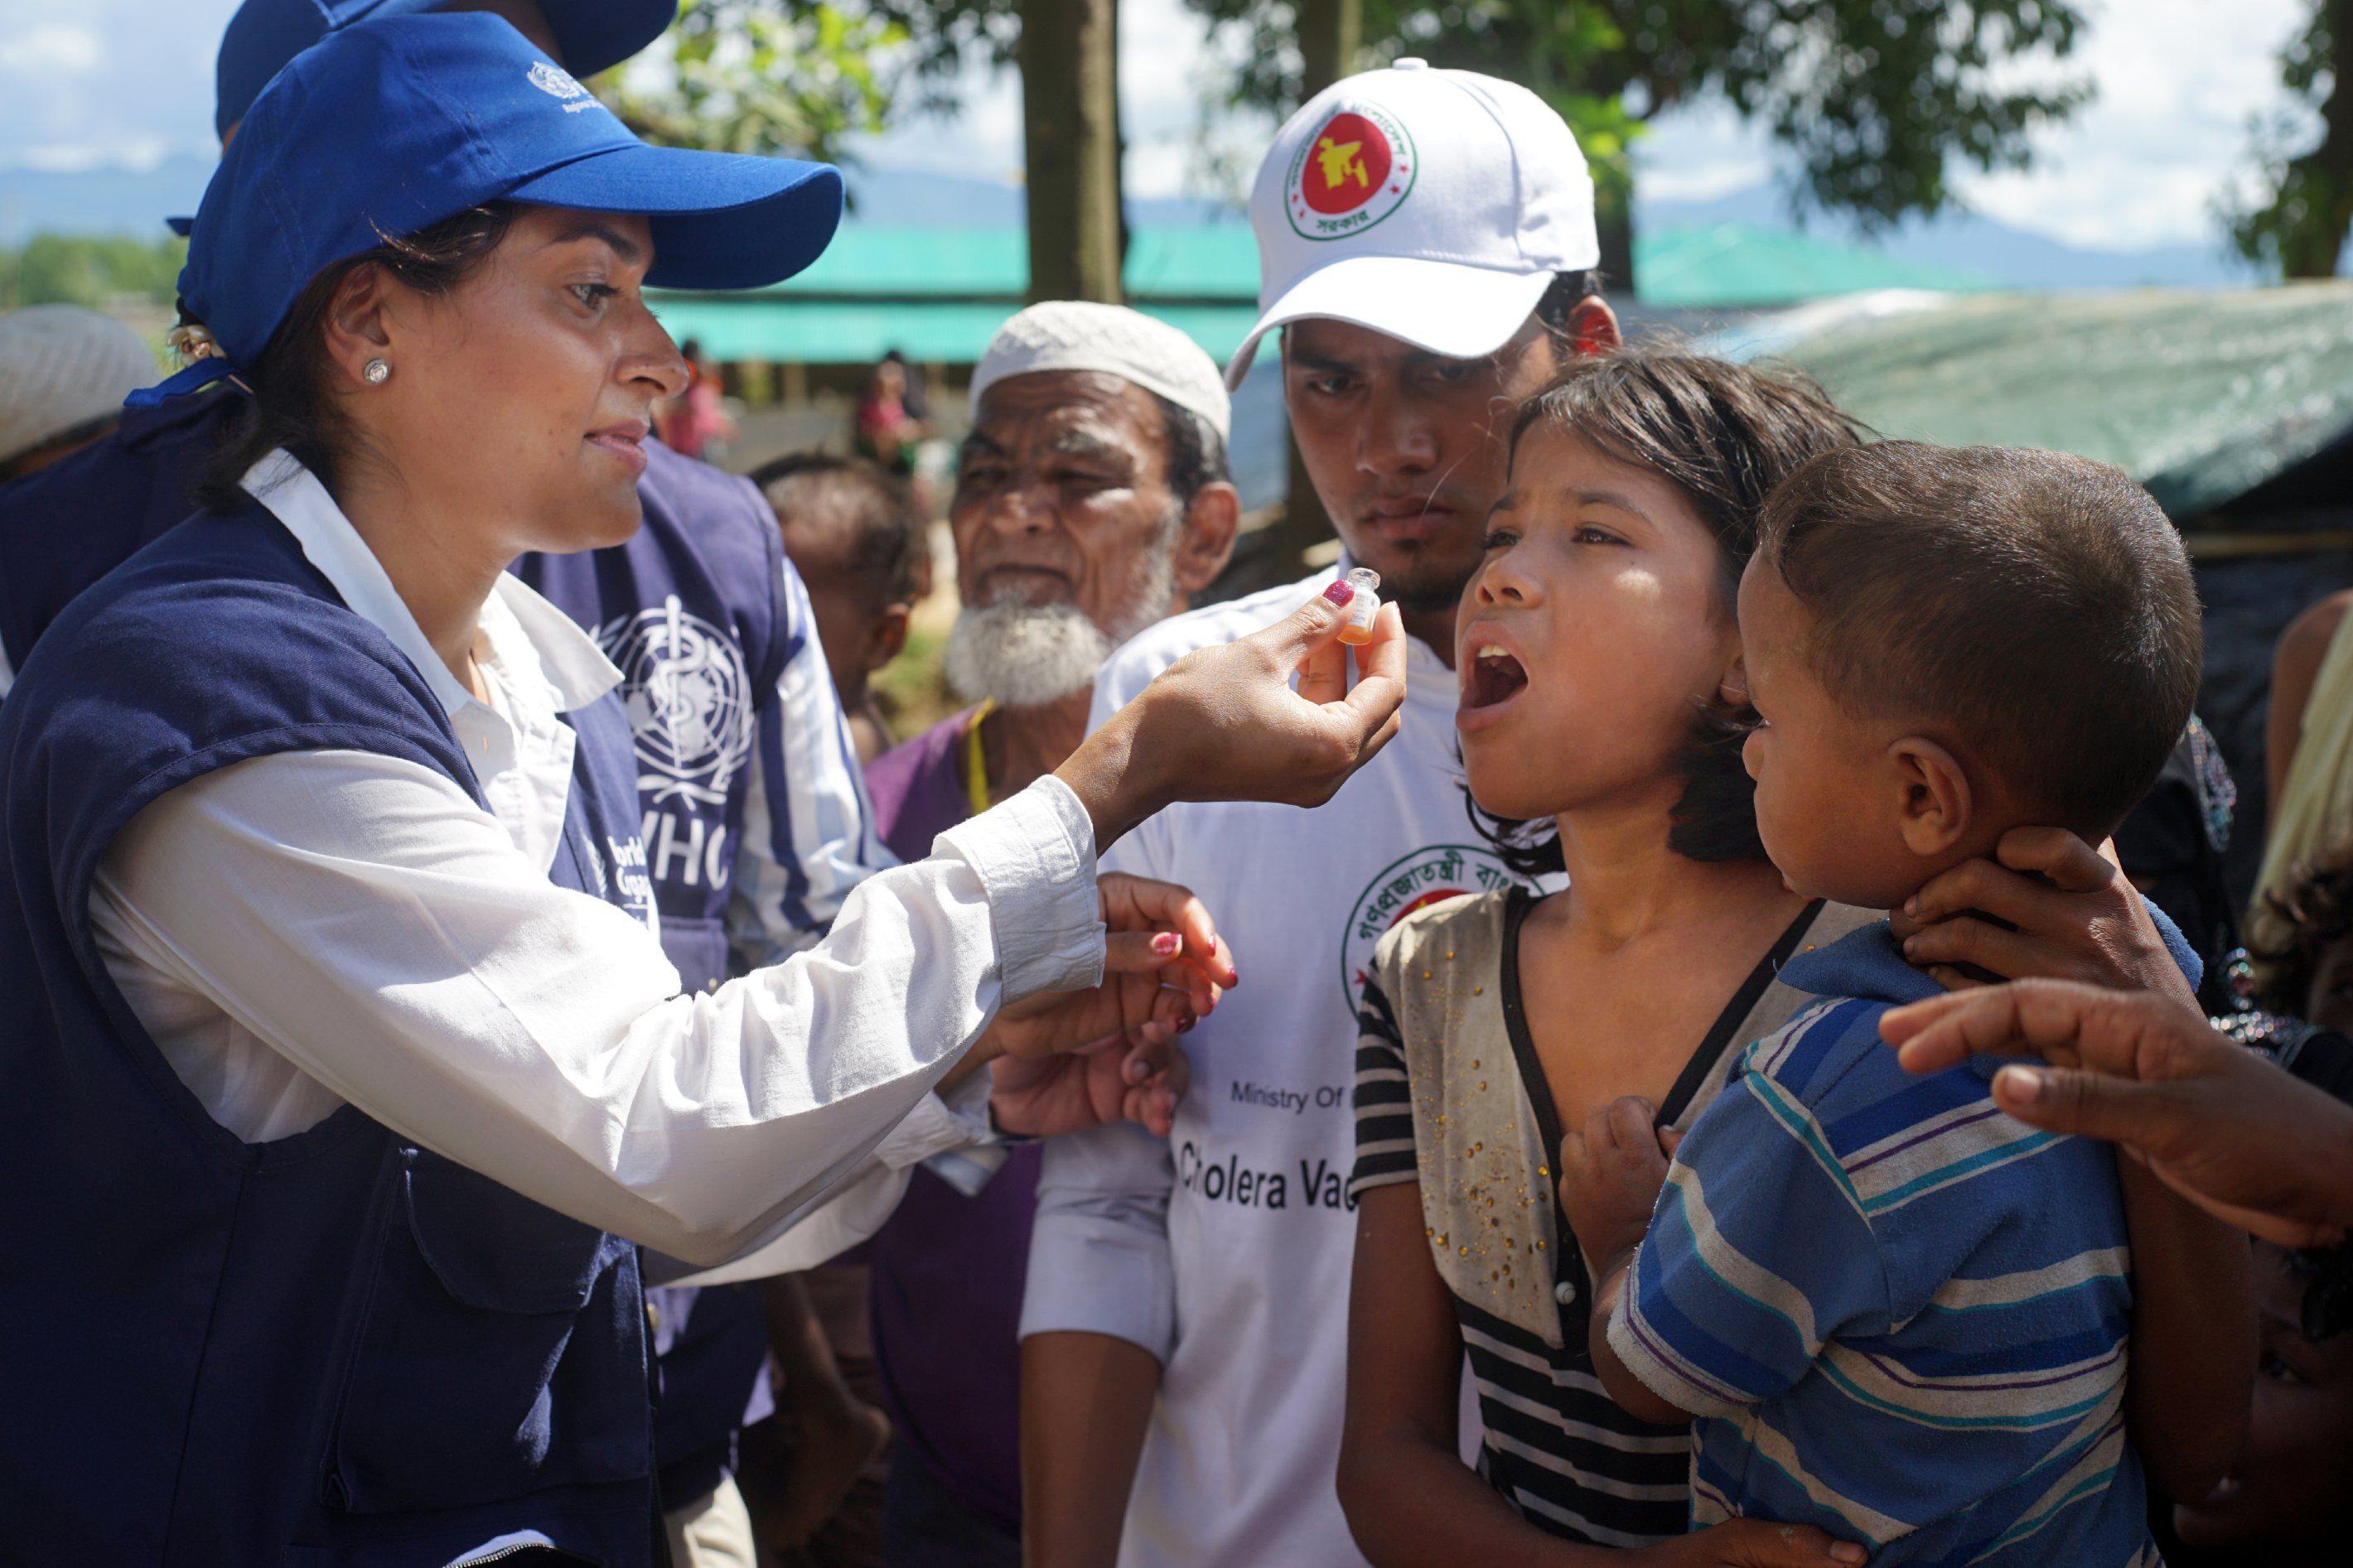 A WHO Officer gives an oral vaccine to a child.